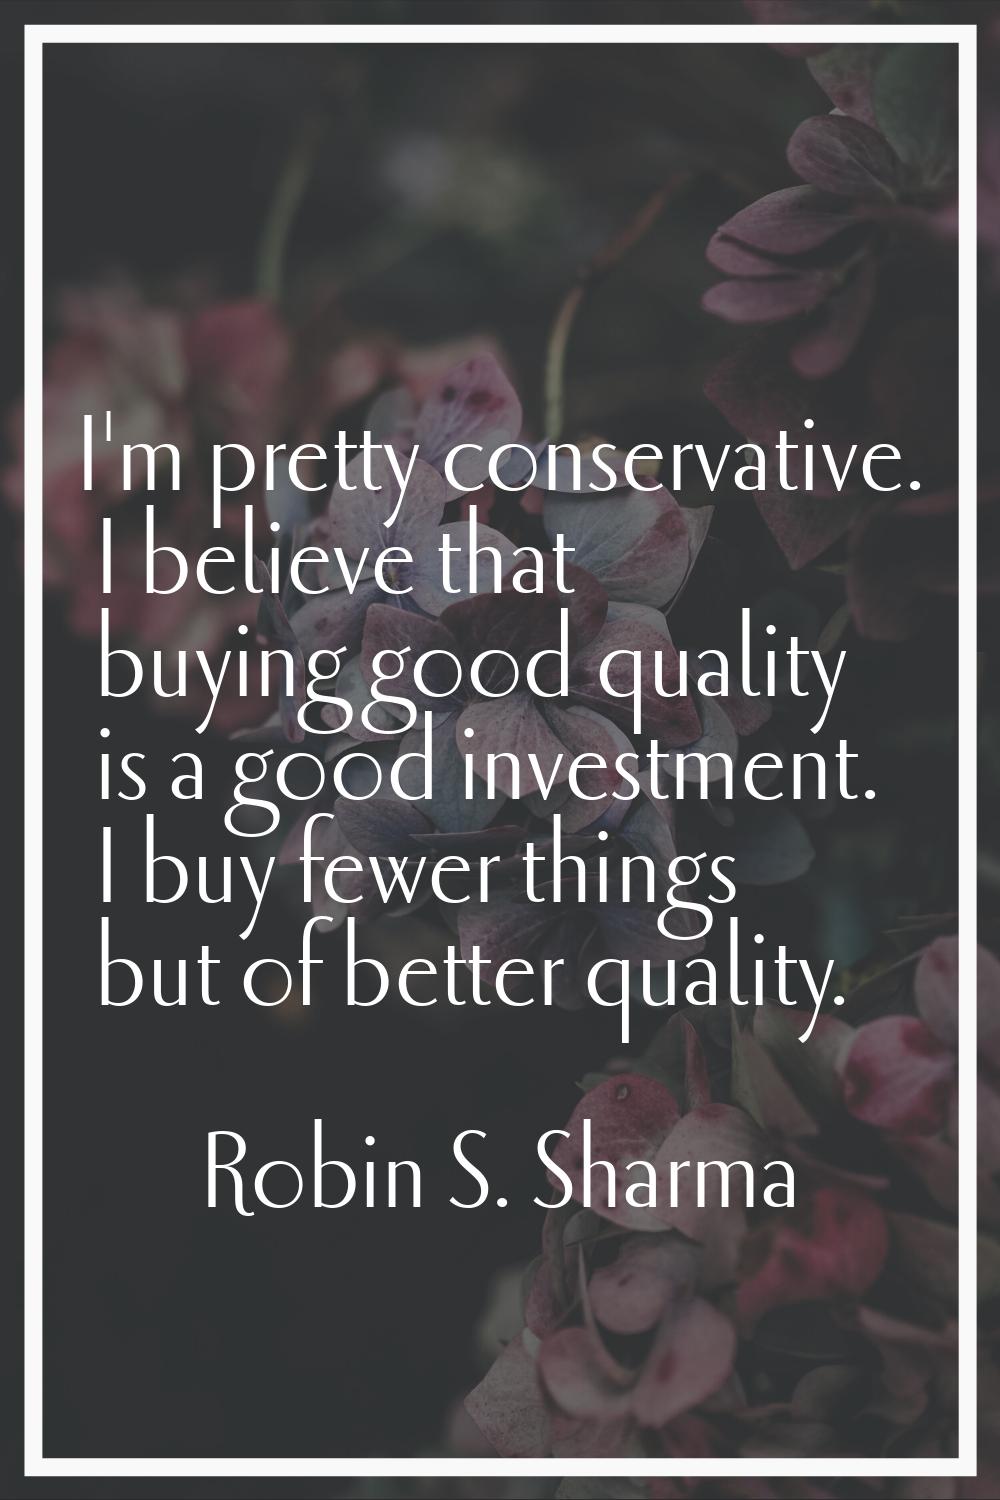 I'm pretty conservative. I believe that buying good quality is a good investment. I buy fewer thing